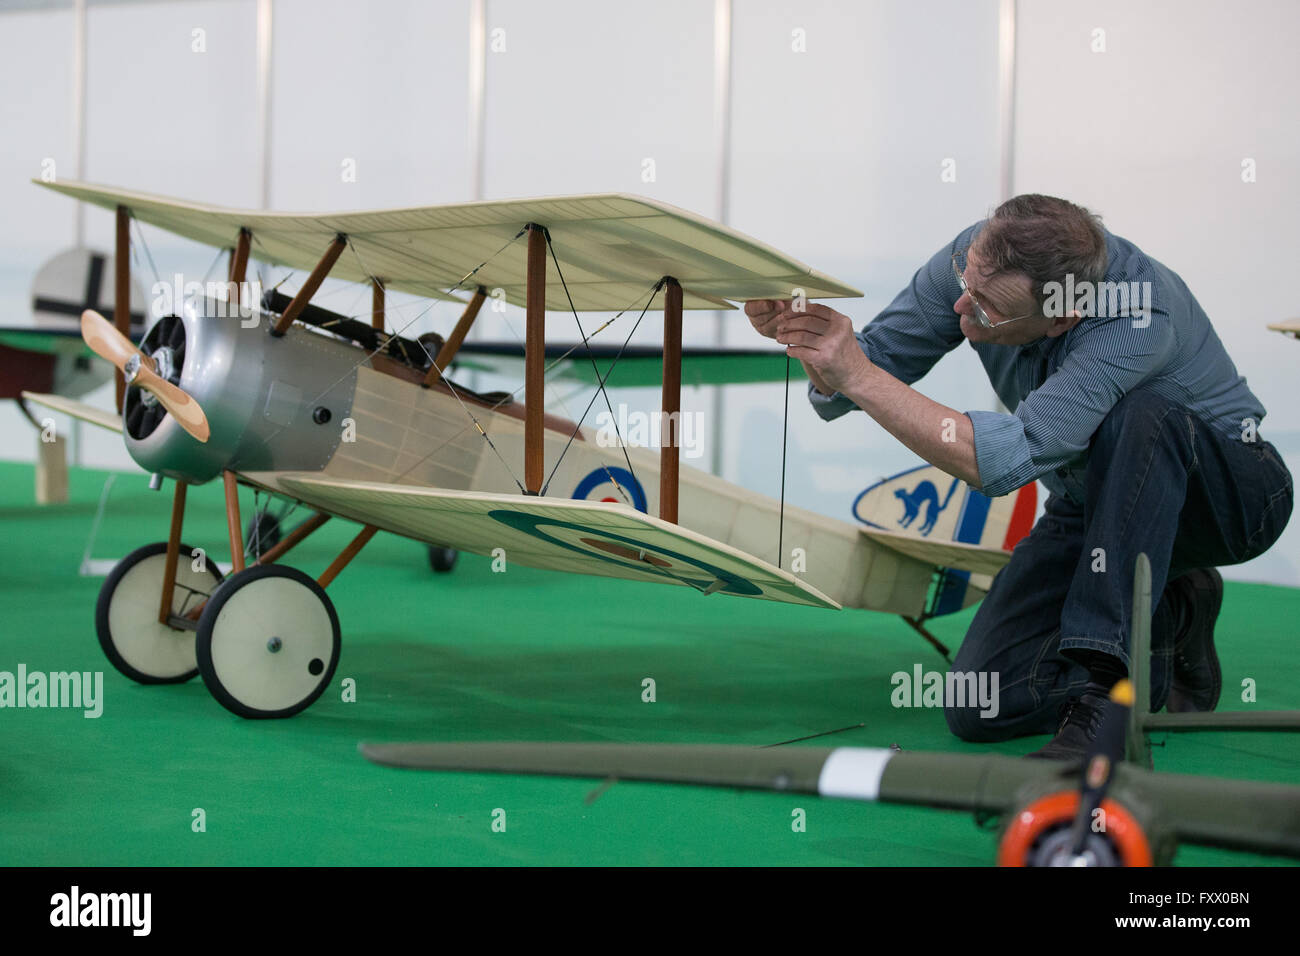 Dortmund, Germany. 19th Apr, 2016. Exhibitor Vasilij working on the plane model 'Sopwith Pup' at the modelling fair 'Intermodellbau' in Dortmund, Germany, 19 April 2016. The world's biggest fair for modelling and model sports takes place from 20 to 25 April 2016. PHOTO: MAJA HITIJ/dpa/Alamy Live News Stock Photo